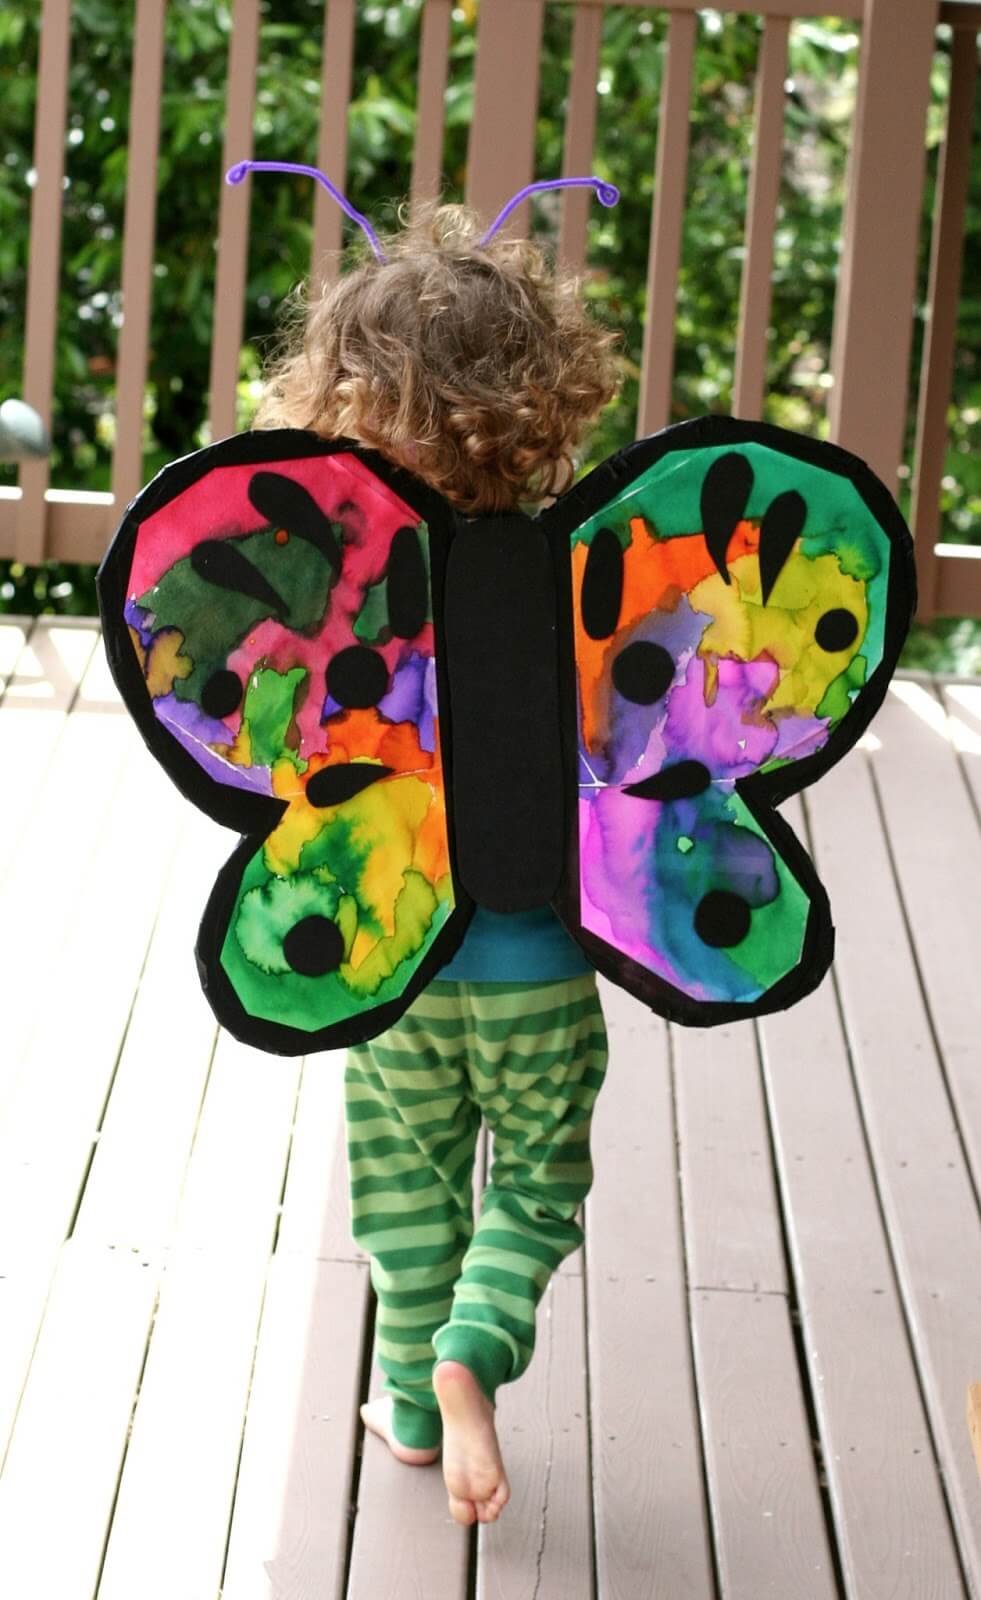 How To Make Butterfly Wings Craft Out Of Cardboard For Kids